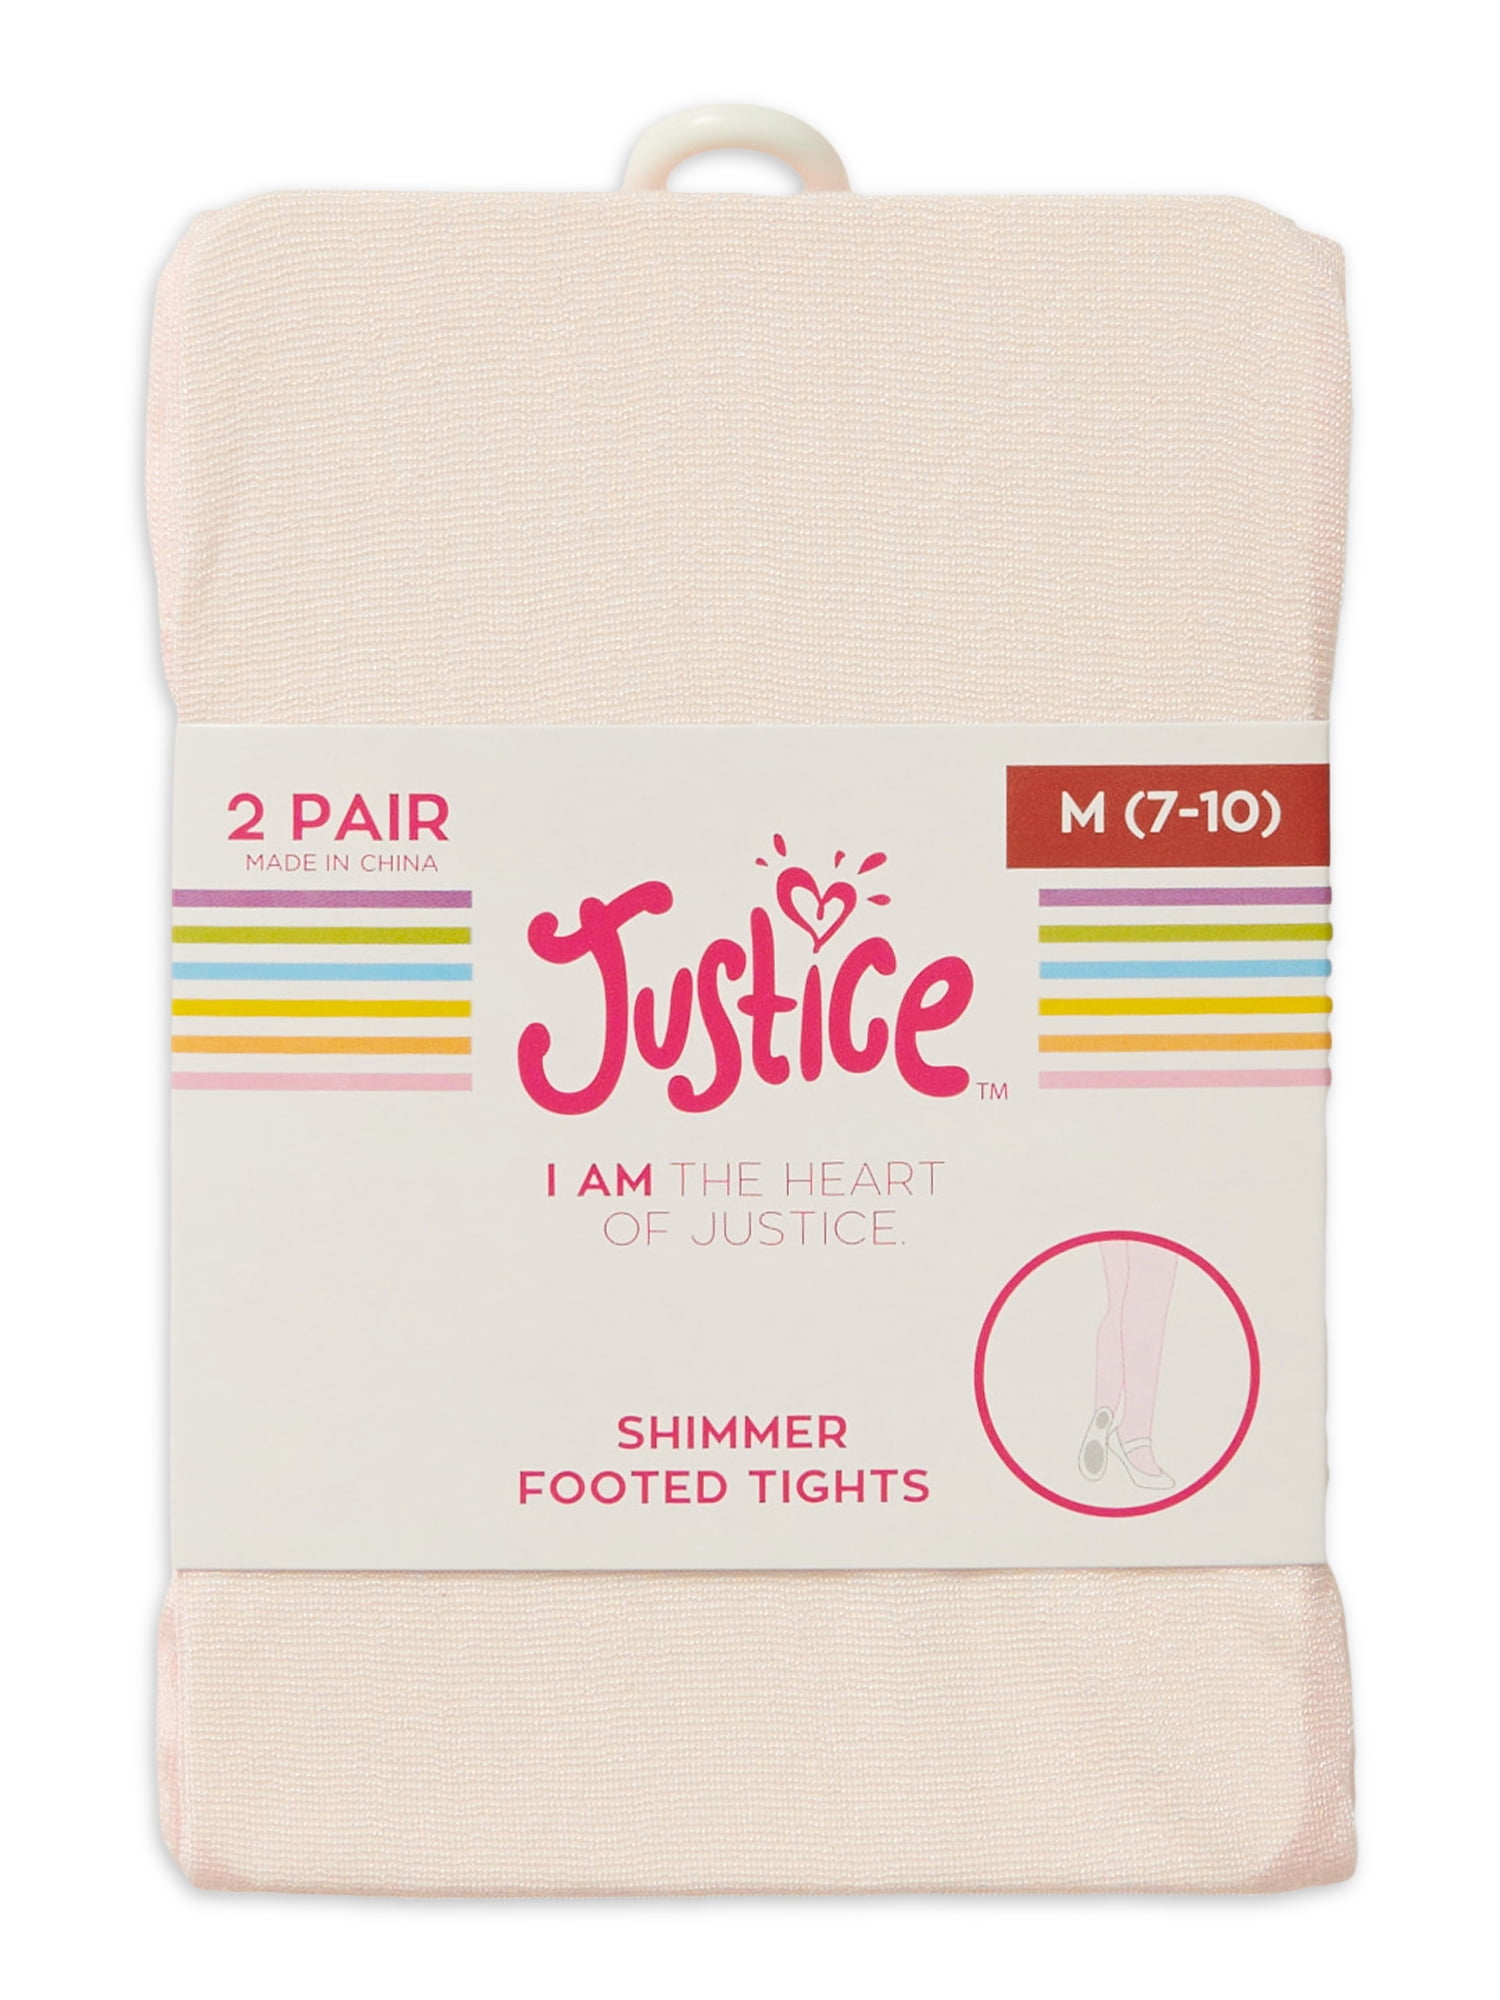 2 Pair Justice Shimmer Footed Tights